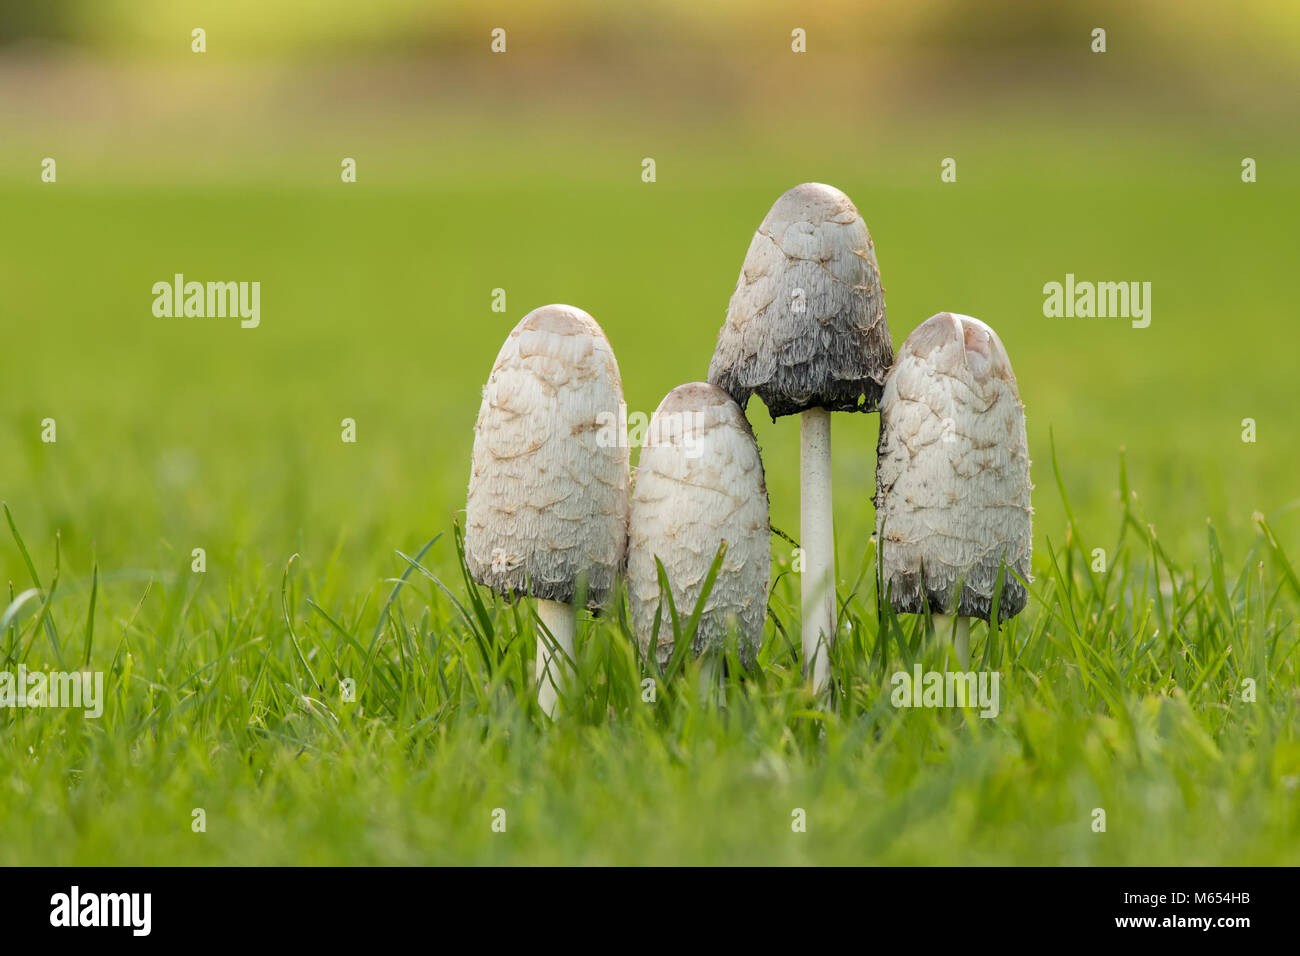 Group of four Shaggy Inkcap mushrooms (Coprinus comatus) growing on a lawn. Tipperary, Ireland Stock Photo